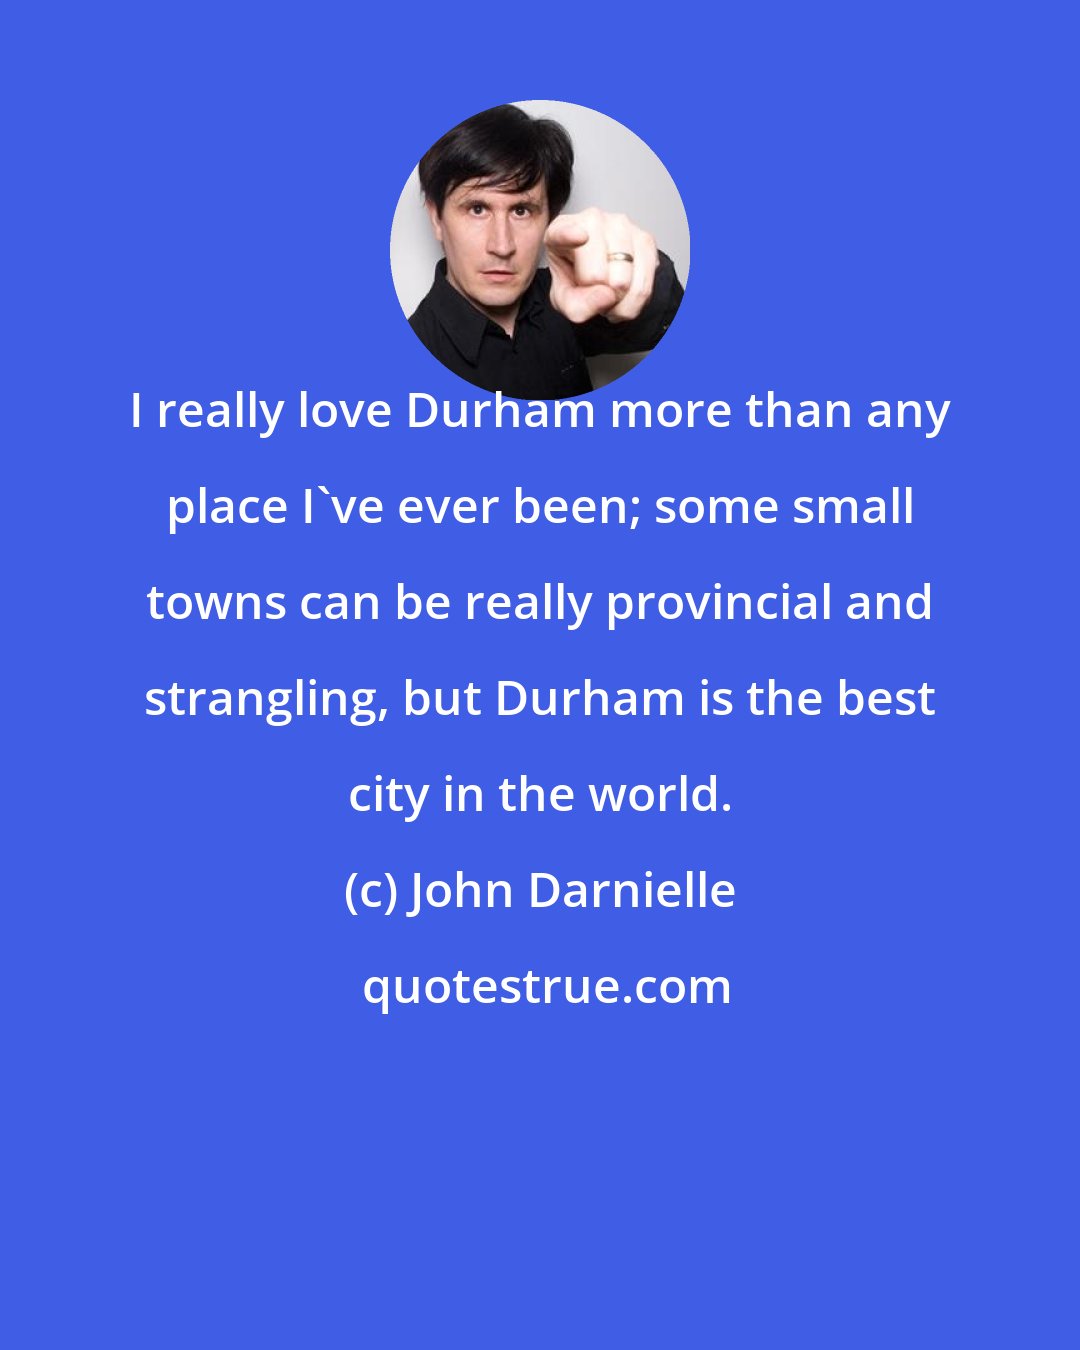 John Darnielle: I really love Durham more than any place I've ever been; some small towns can be really provincial and strangling, but Durham is the best city in the world.